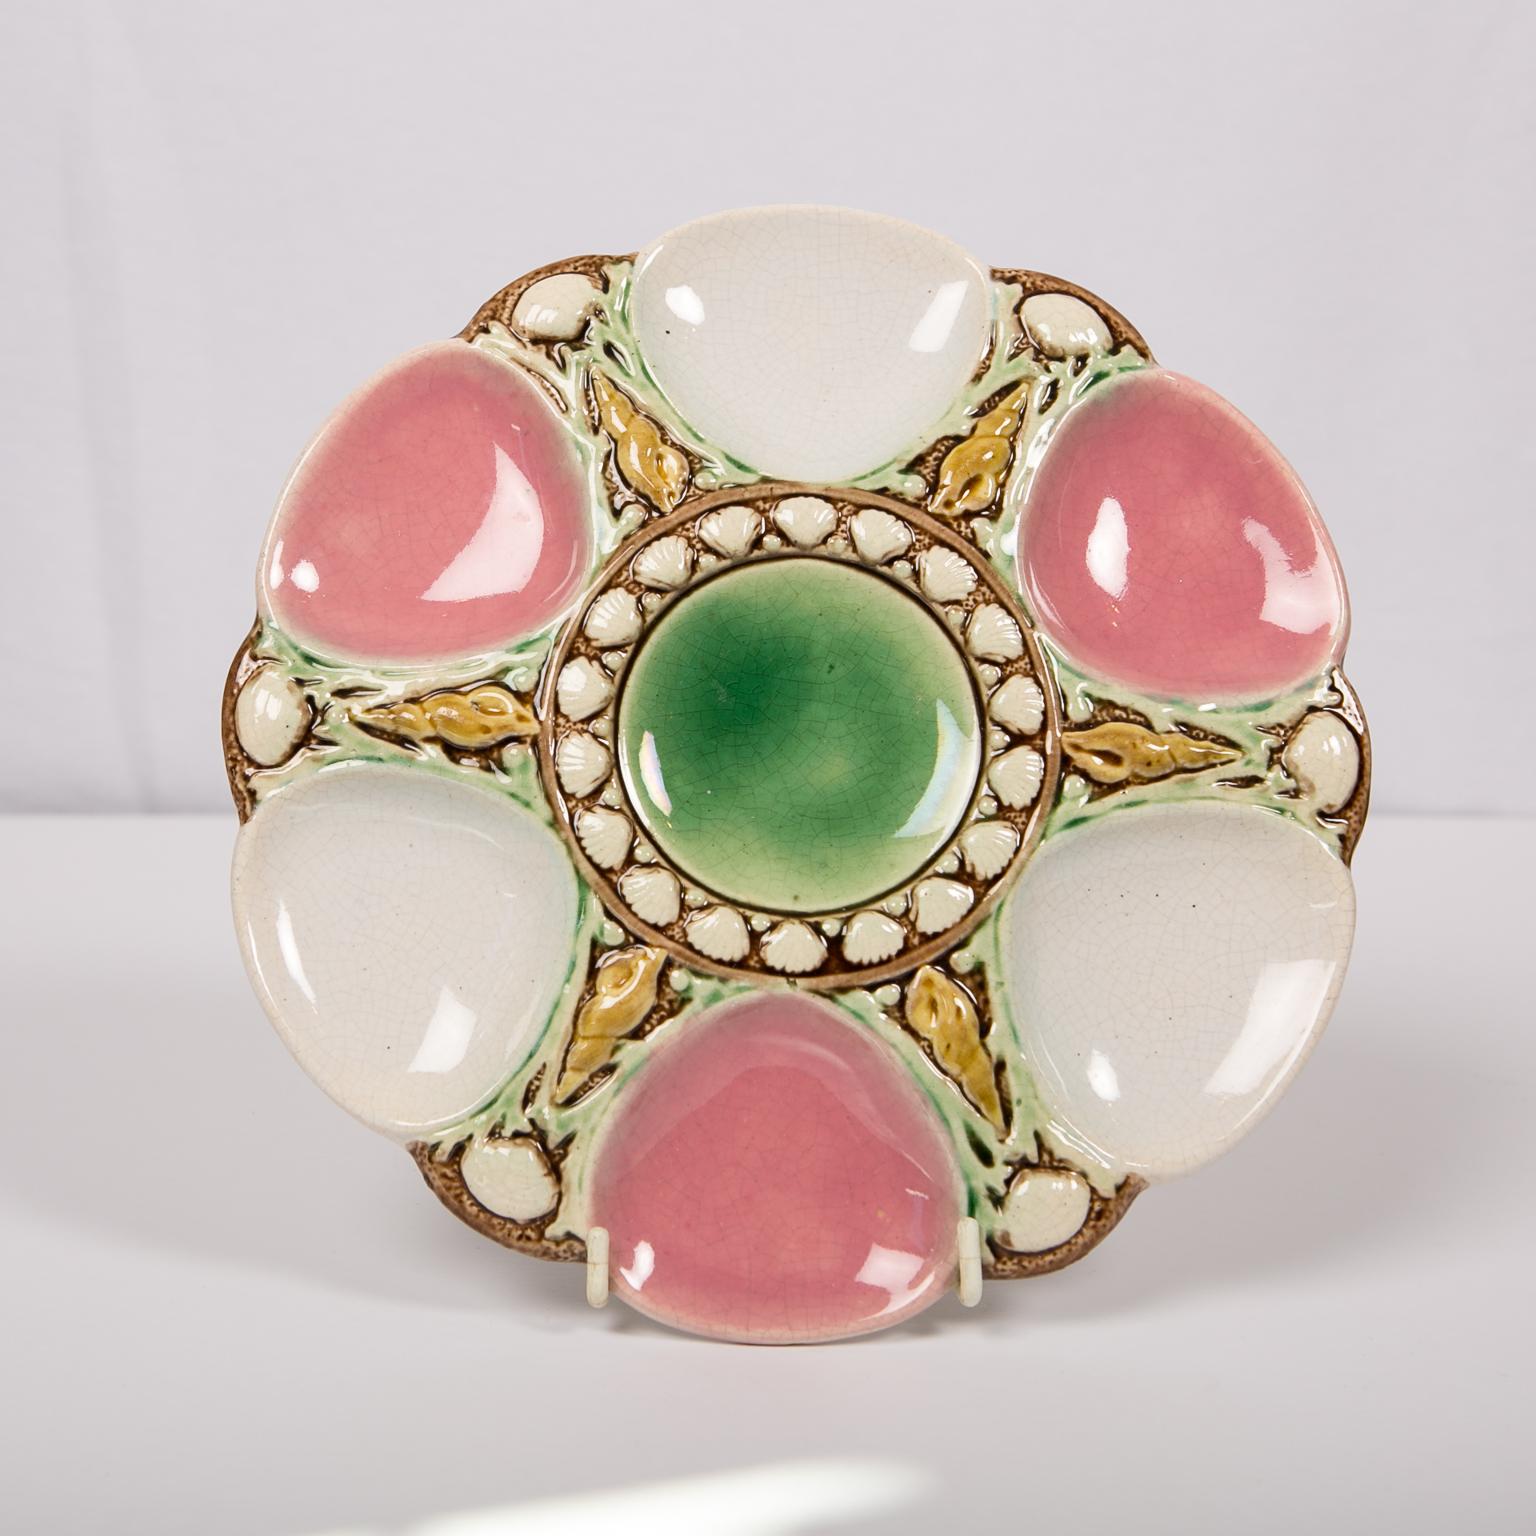 A beautiful Majolica oyster plate painted with colored glazes with three pink and three white oyster cups and a green central rondel for sauce, all enhanced by a decoration of sea shells separating the six cups.
Background
 Oyster plates were first